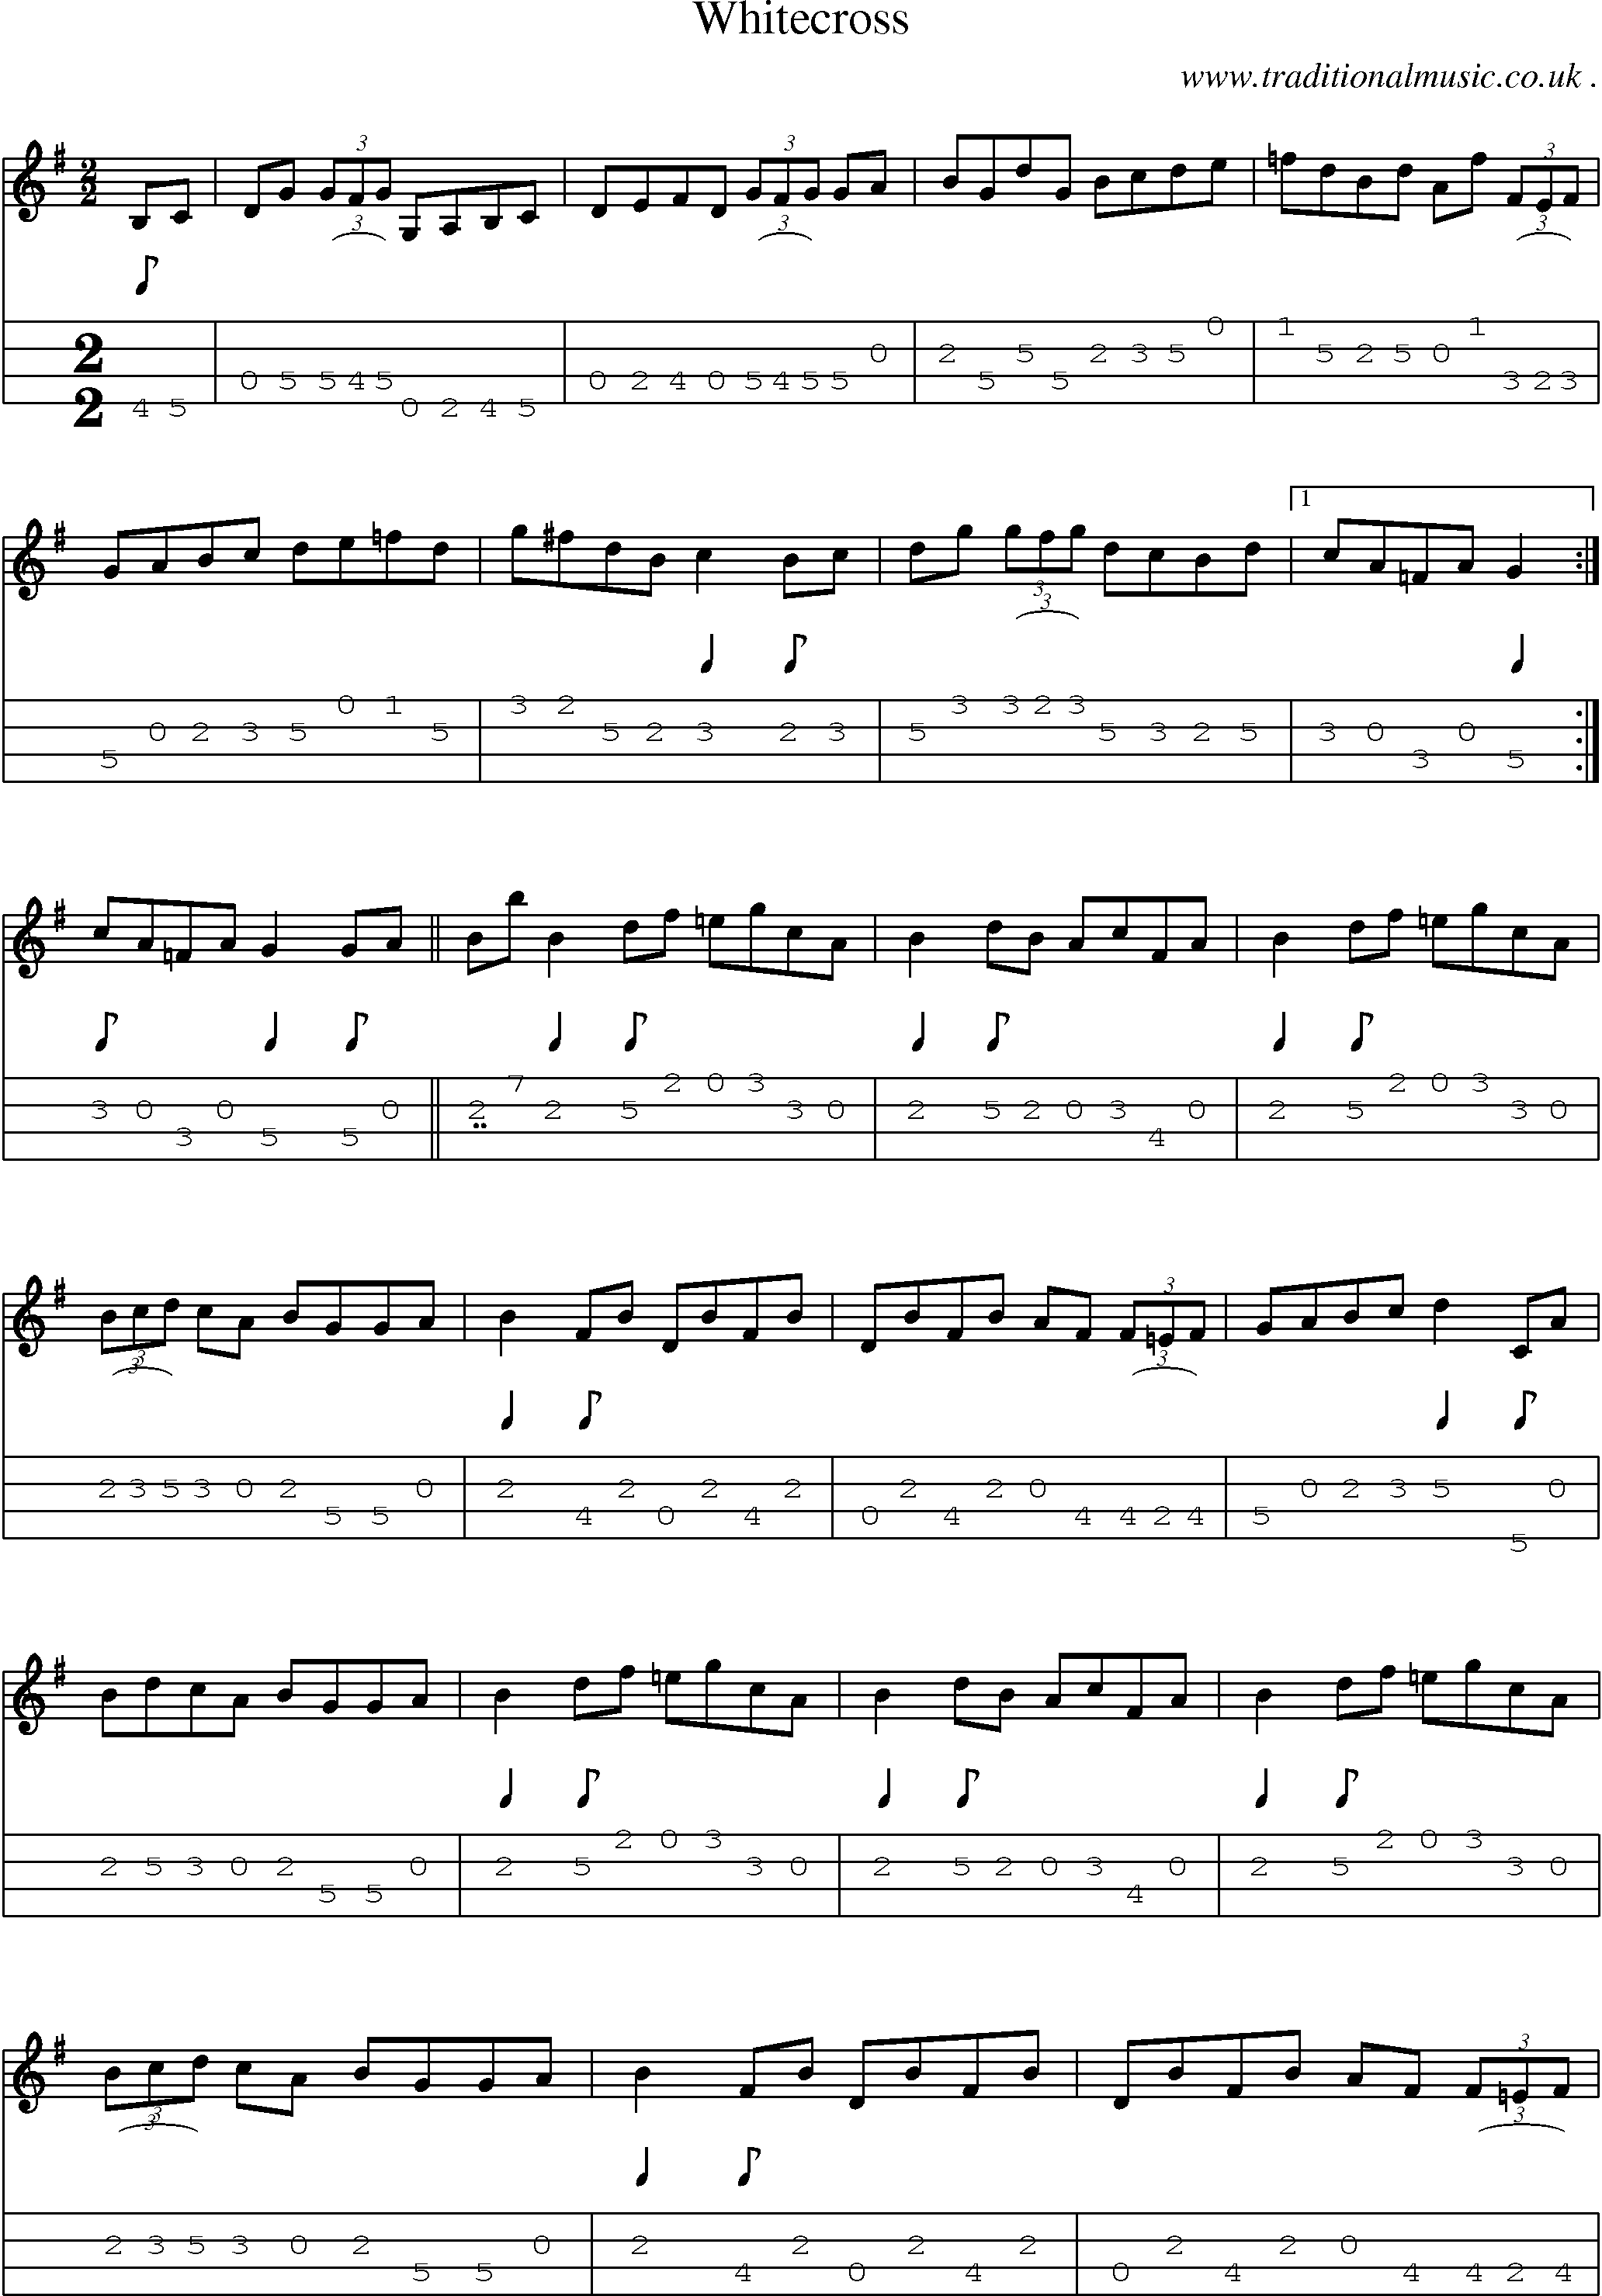 Sheet-Music and Mandolin Tabs for Whitecross